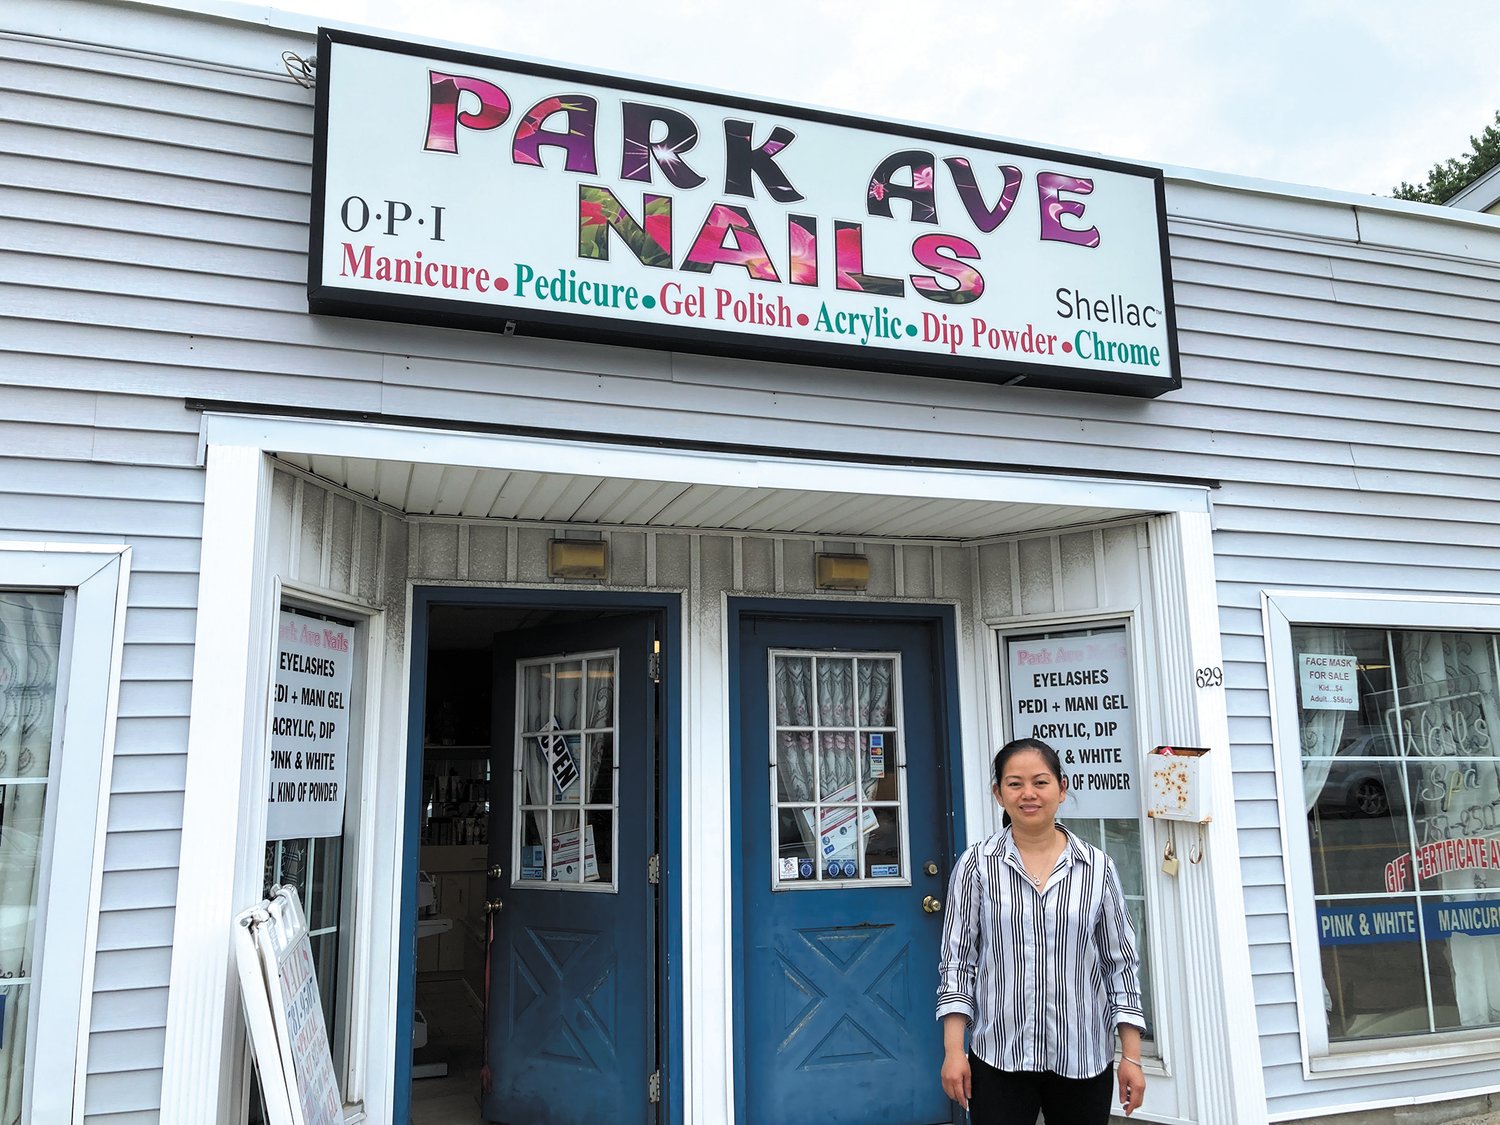 WHEN WILL THE BRIDGE REOPEN: Bit Ruong of Park Ave Nails has been in business for 15 years. Located not even a quarter of a mile from the bridge construction, business has been hurt and she is hoping it will soon reopen.